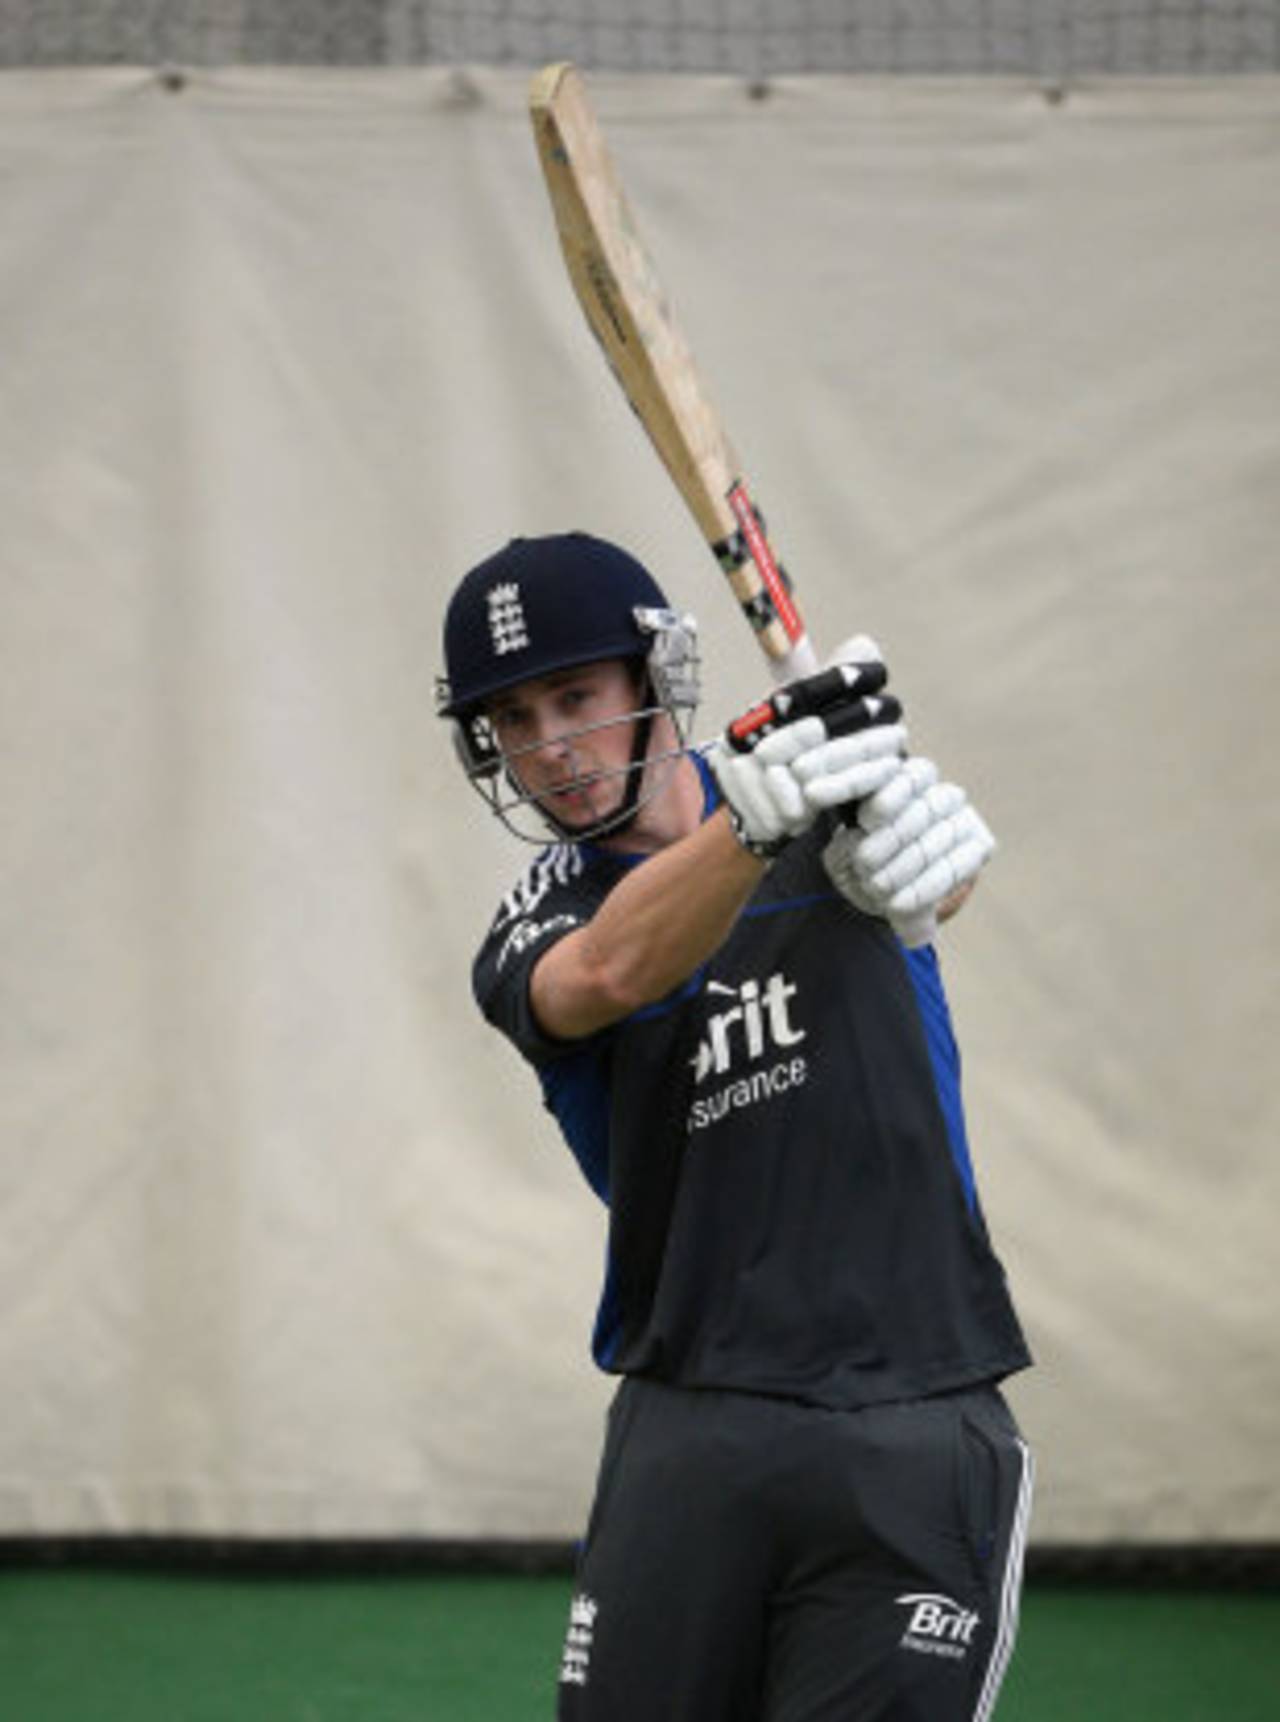 Chris Woakes is hoping to get his chance, Edgbaston, July 3, 2012